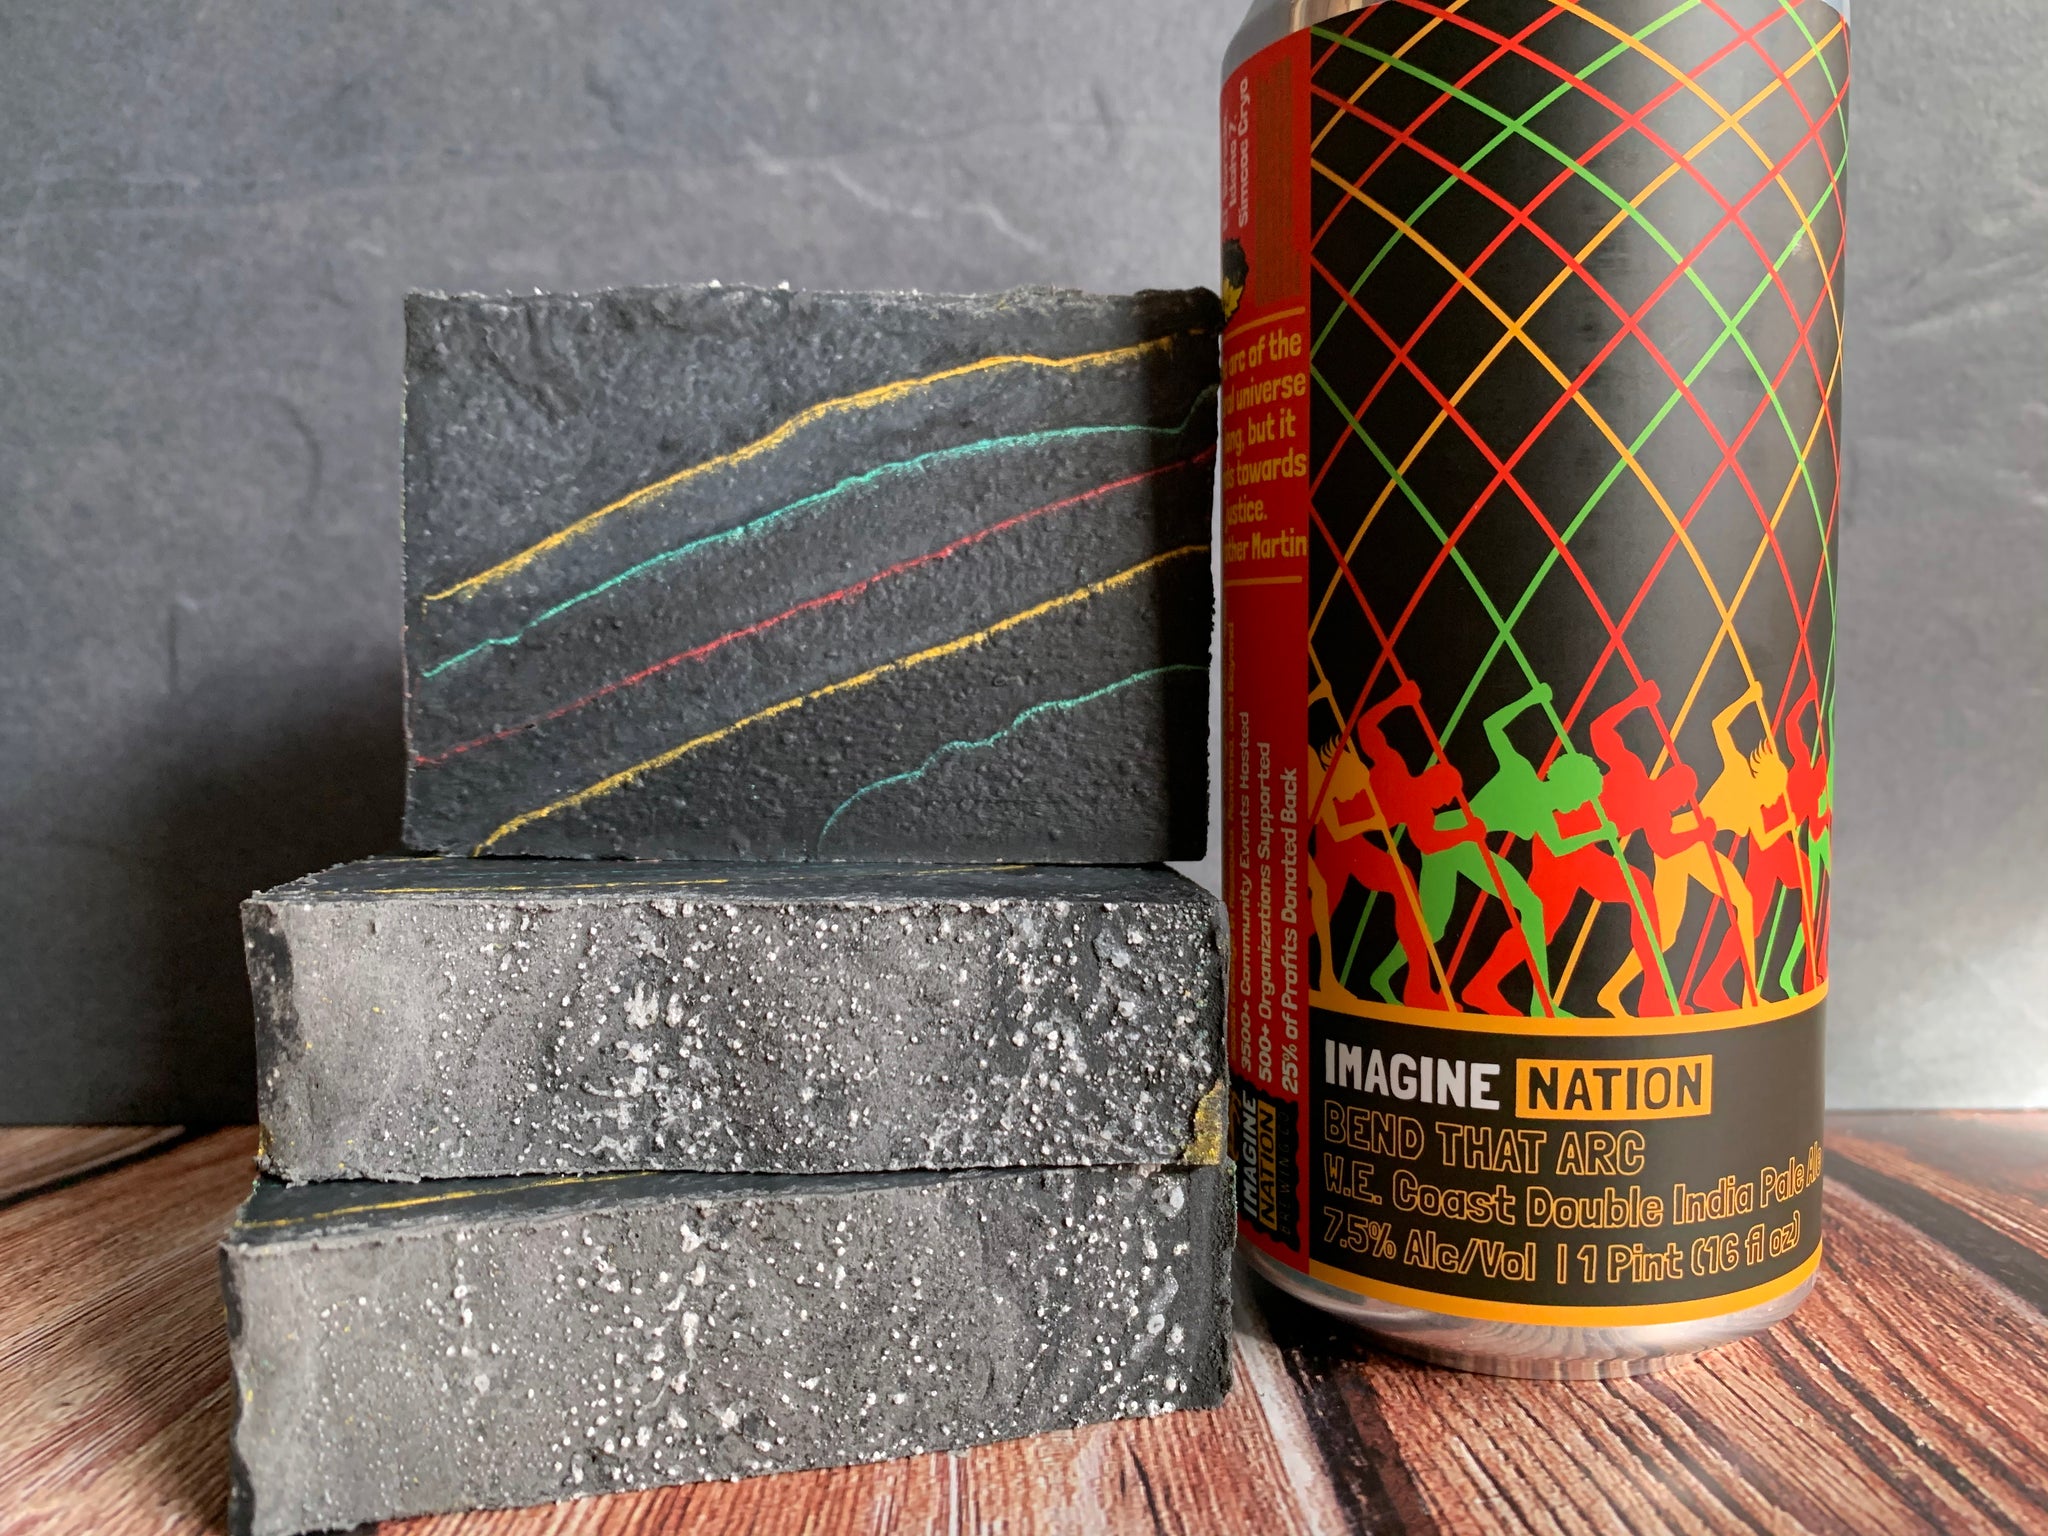 black craft beer soap for him with activated charcoal handmade with bend that arc craft beer from imagine nation craft brewery Missoula Montana craft brewery  handmade soap with lemon essential oil